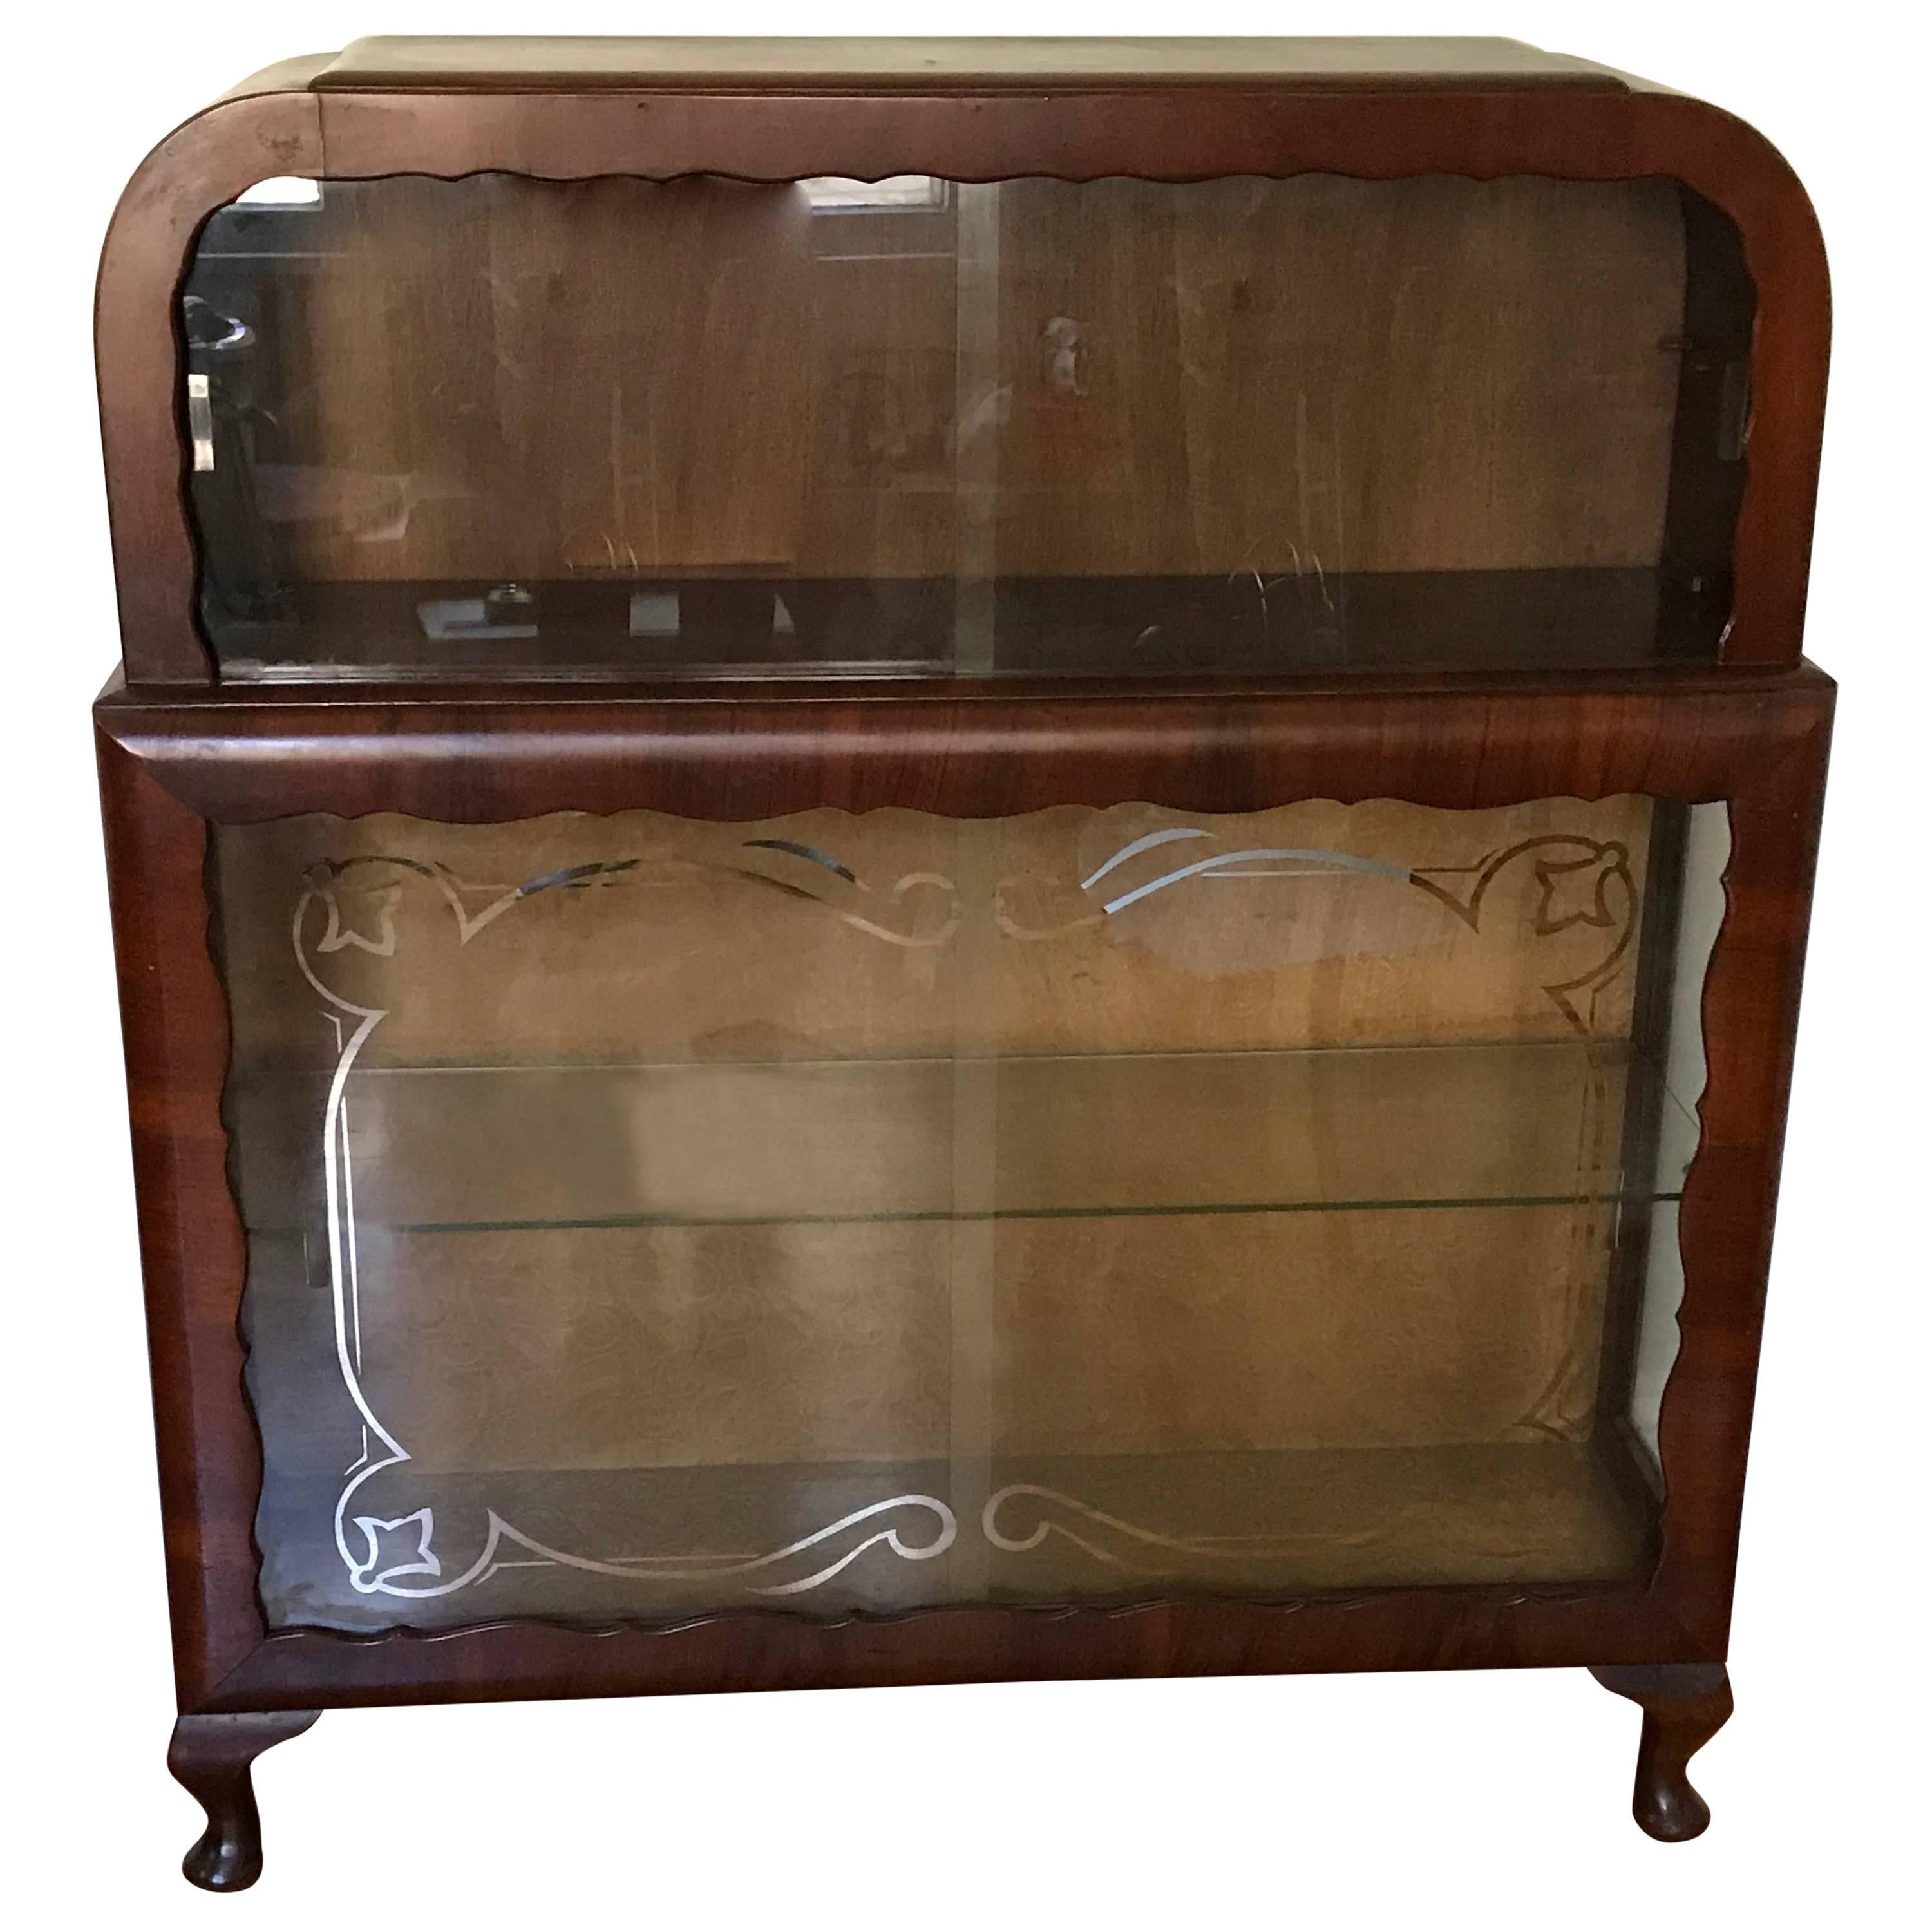 1920s French Art Deco Curio Display Cabinet with Scalloped Woodwork Detailing